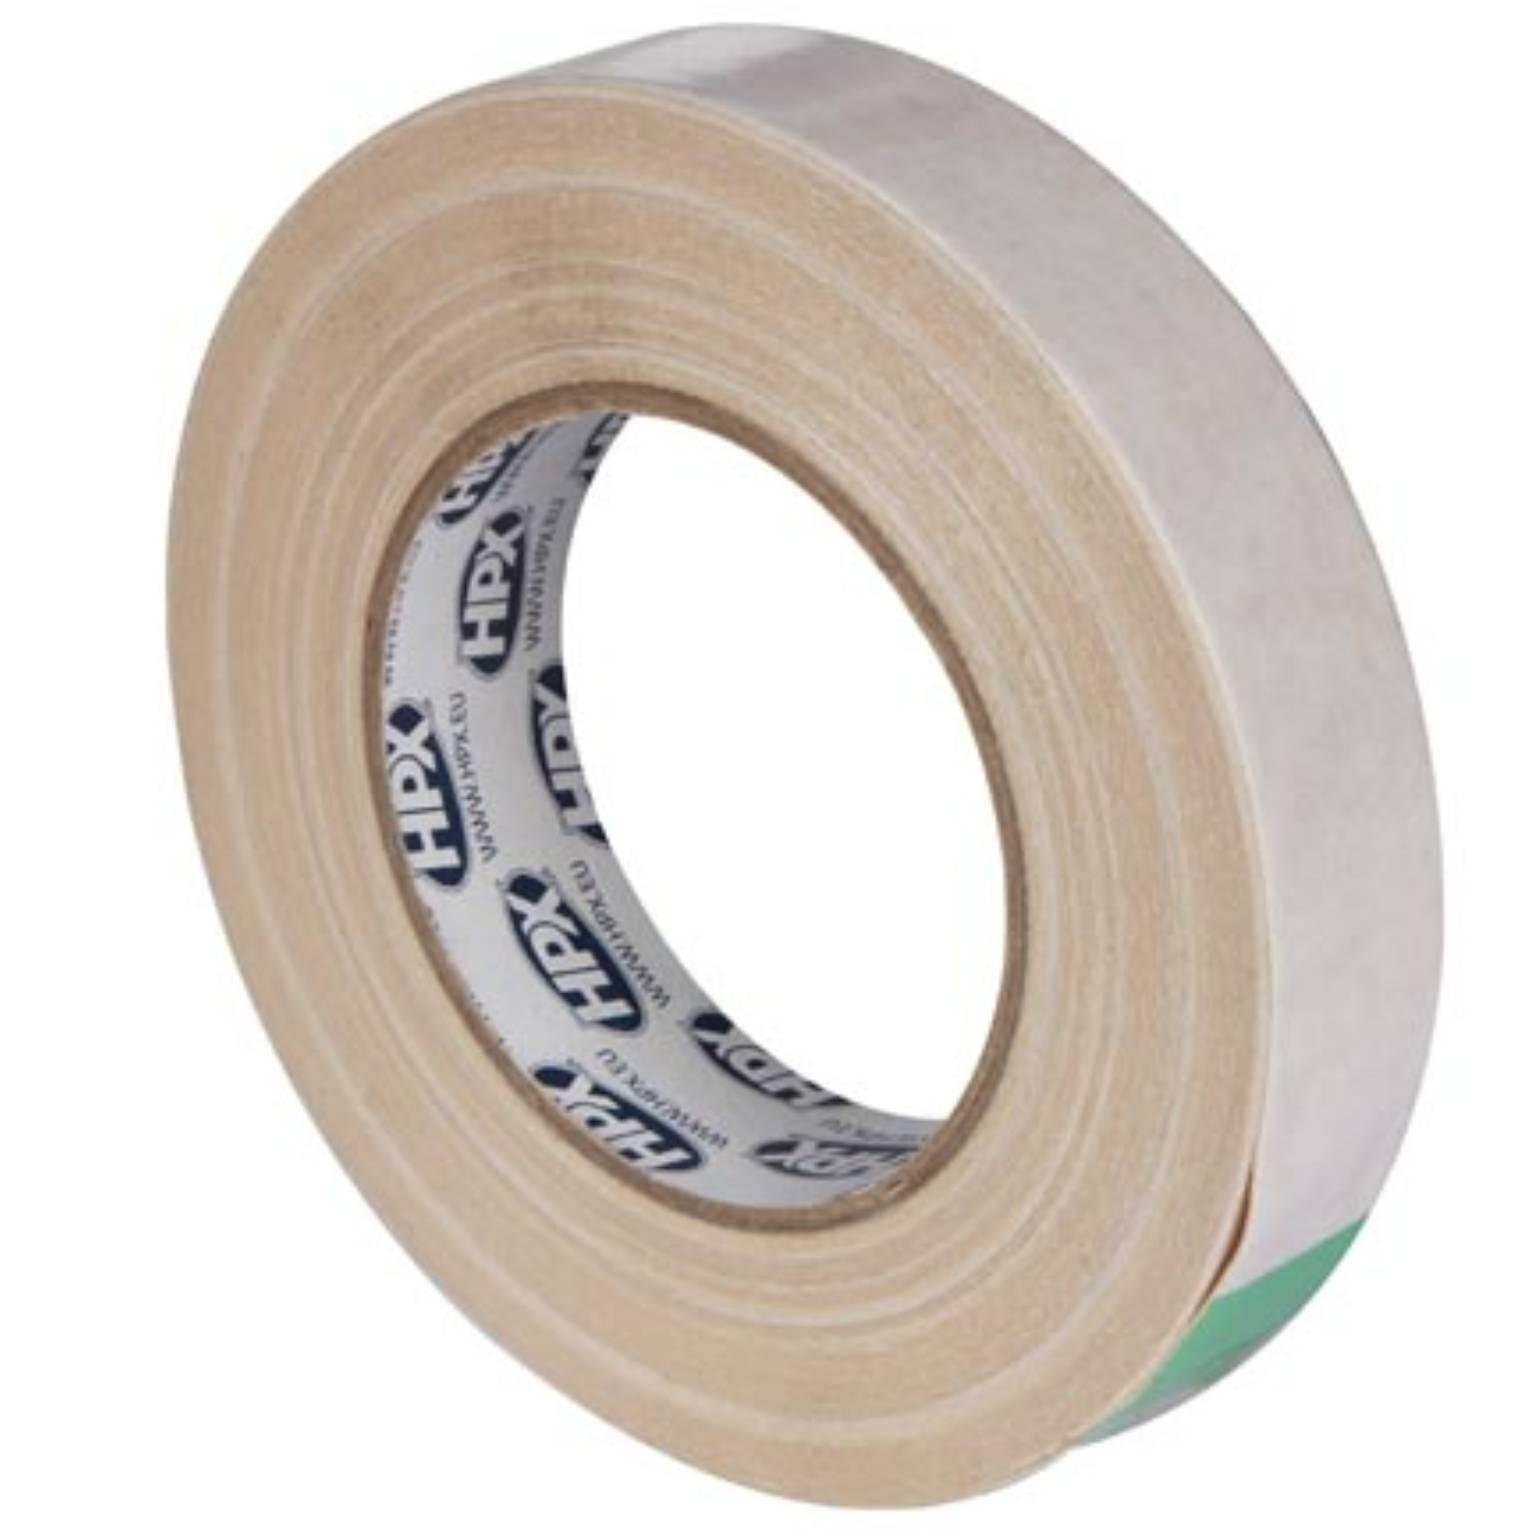 HPX - DOUBLE SIDED CARPET TAPE (25mm x 25m) - HPX